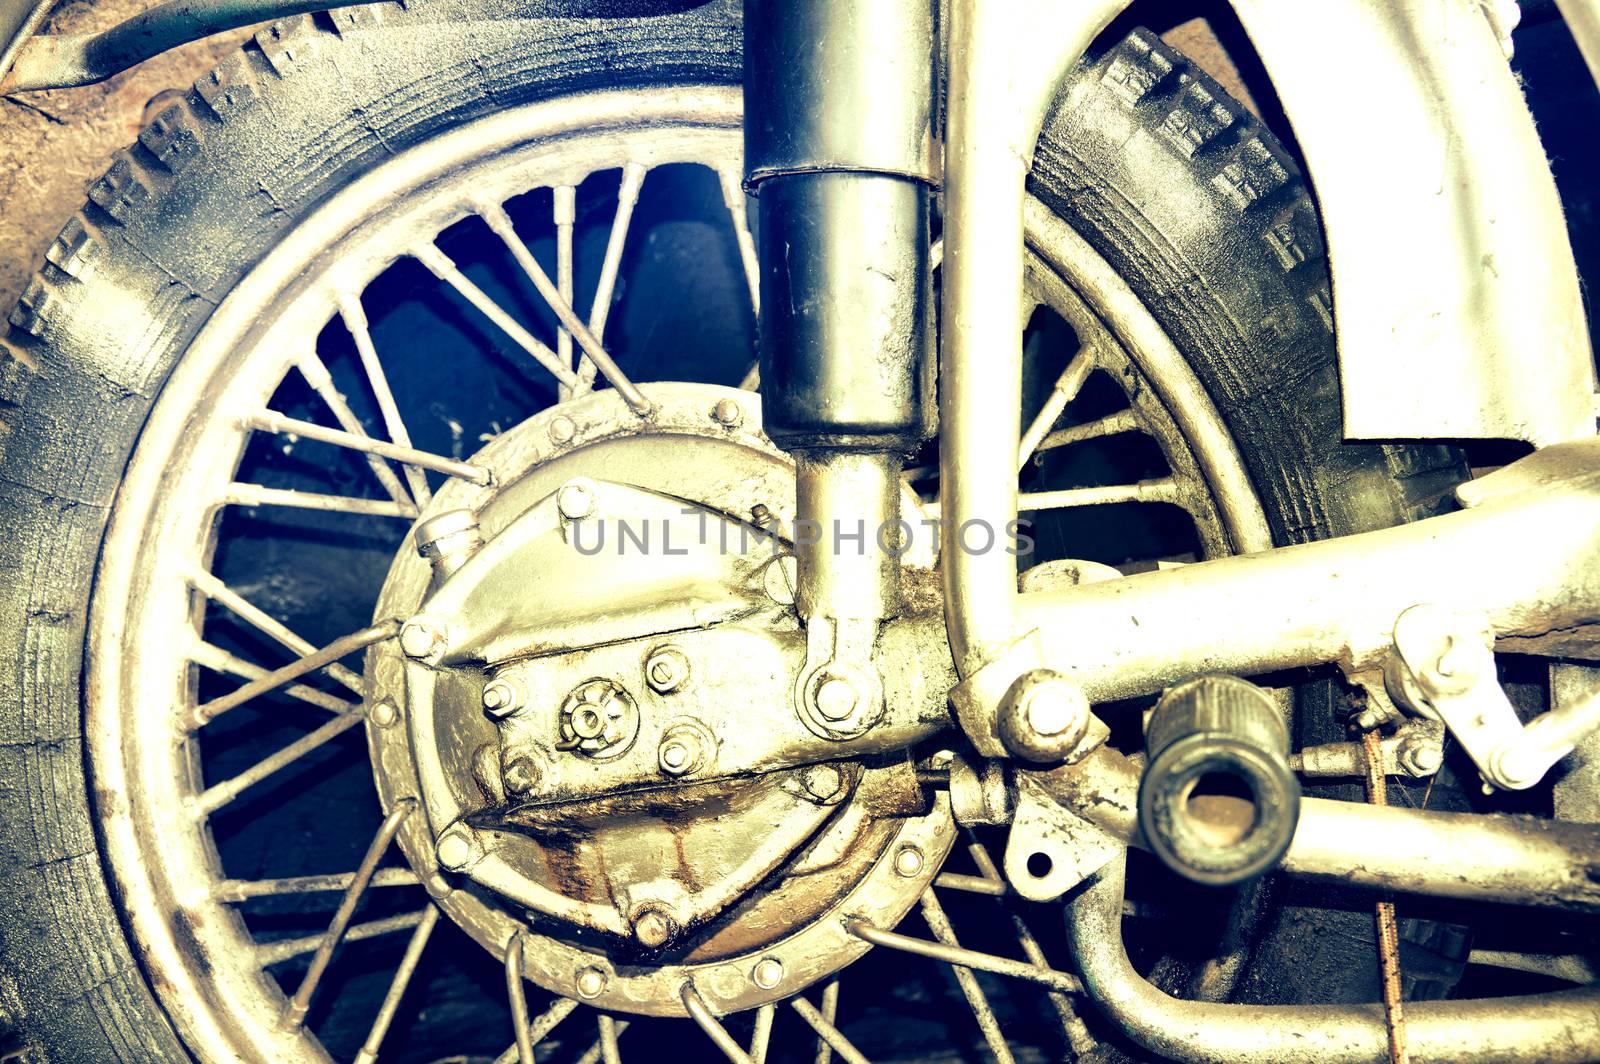 Transportation conceptual image. Motorcycle tire. Part of old motocycle. Creamy pastel vintage picture